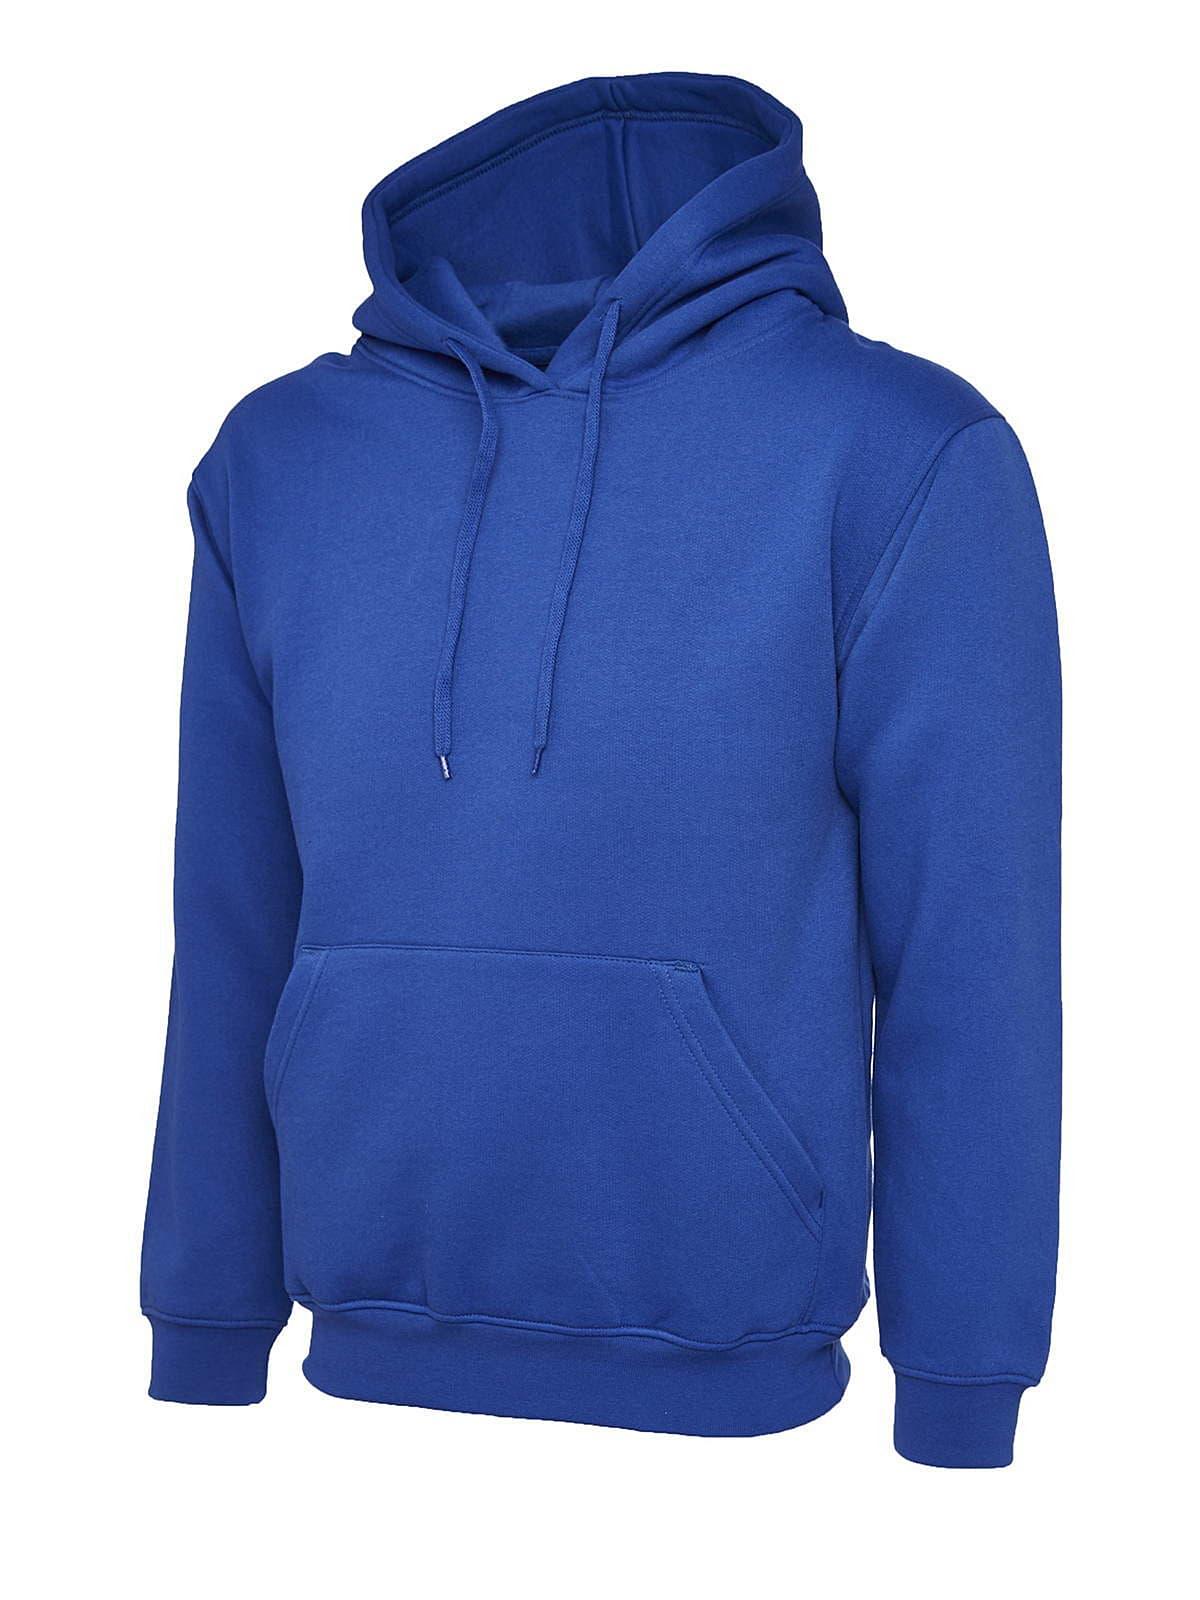 Uneek 300GSM Classic Hoodie in Royal Blue (Product Code: UC502)